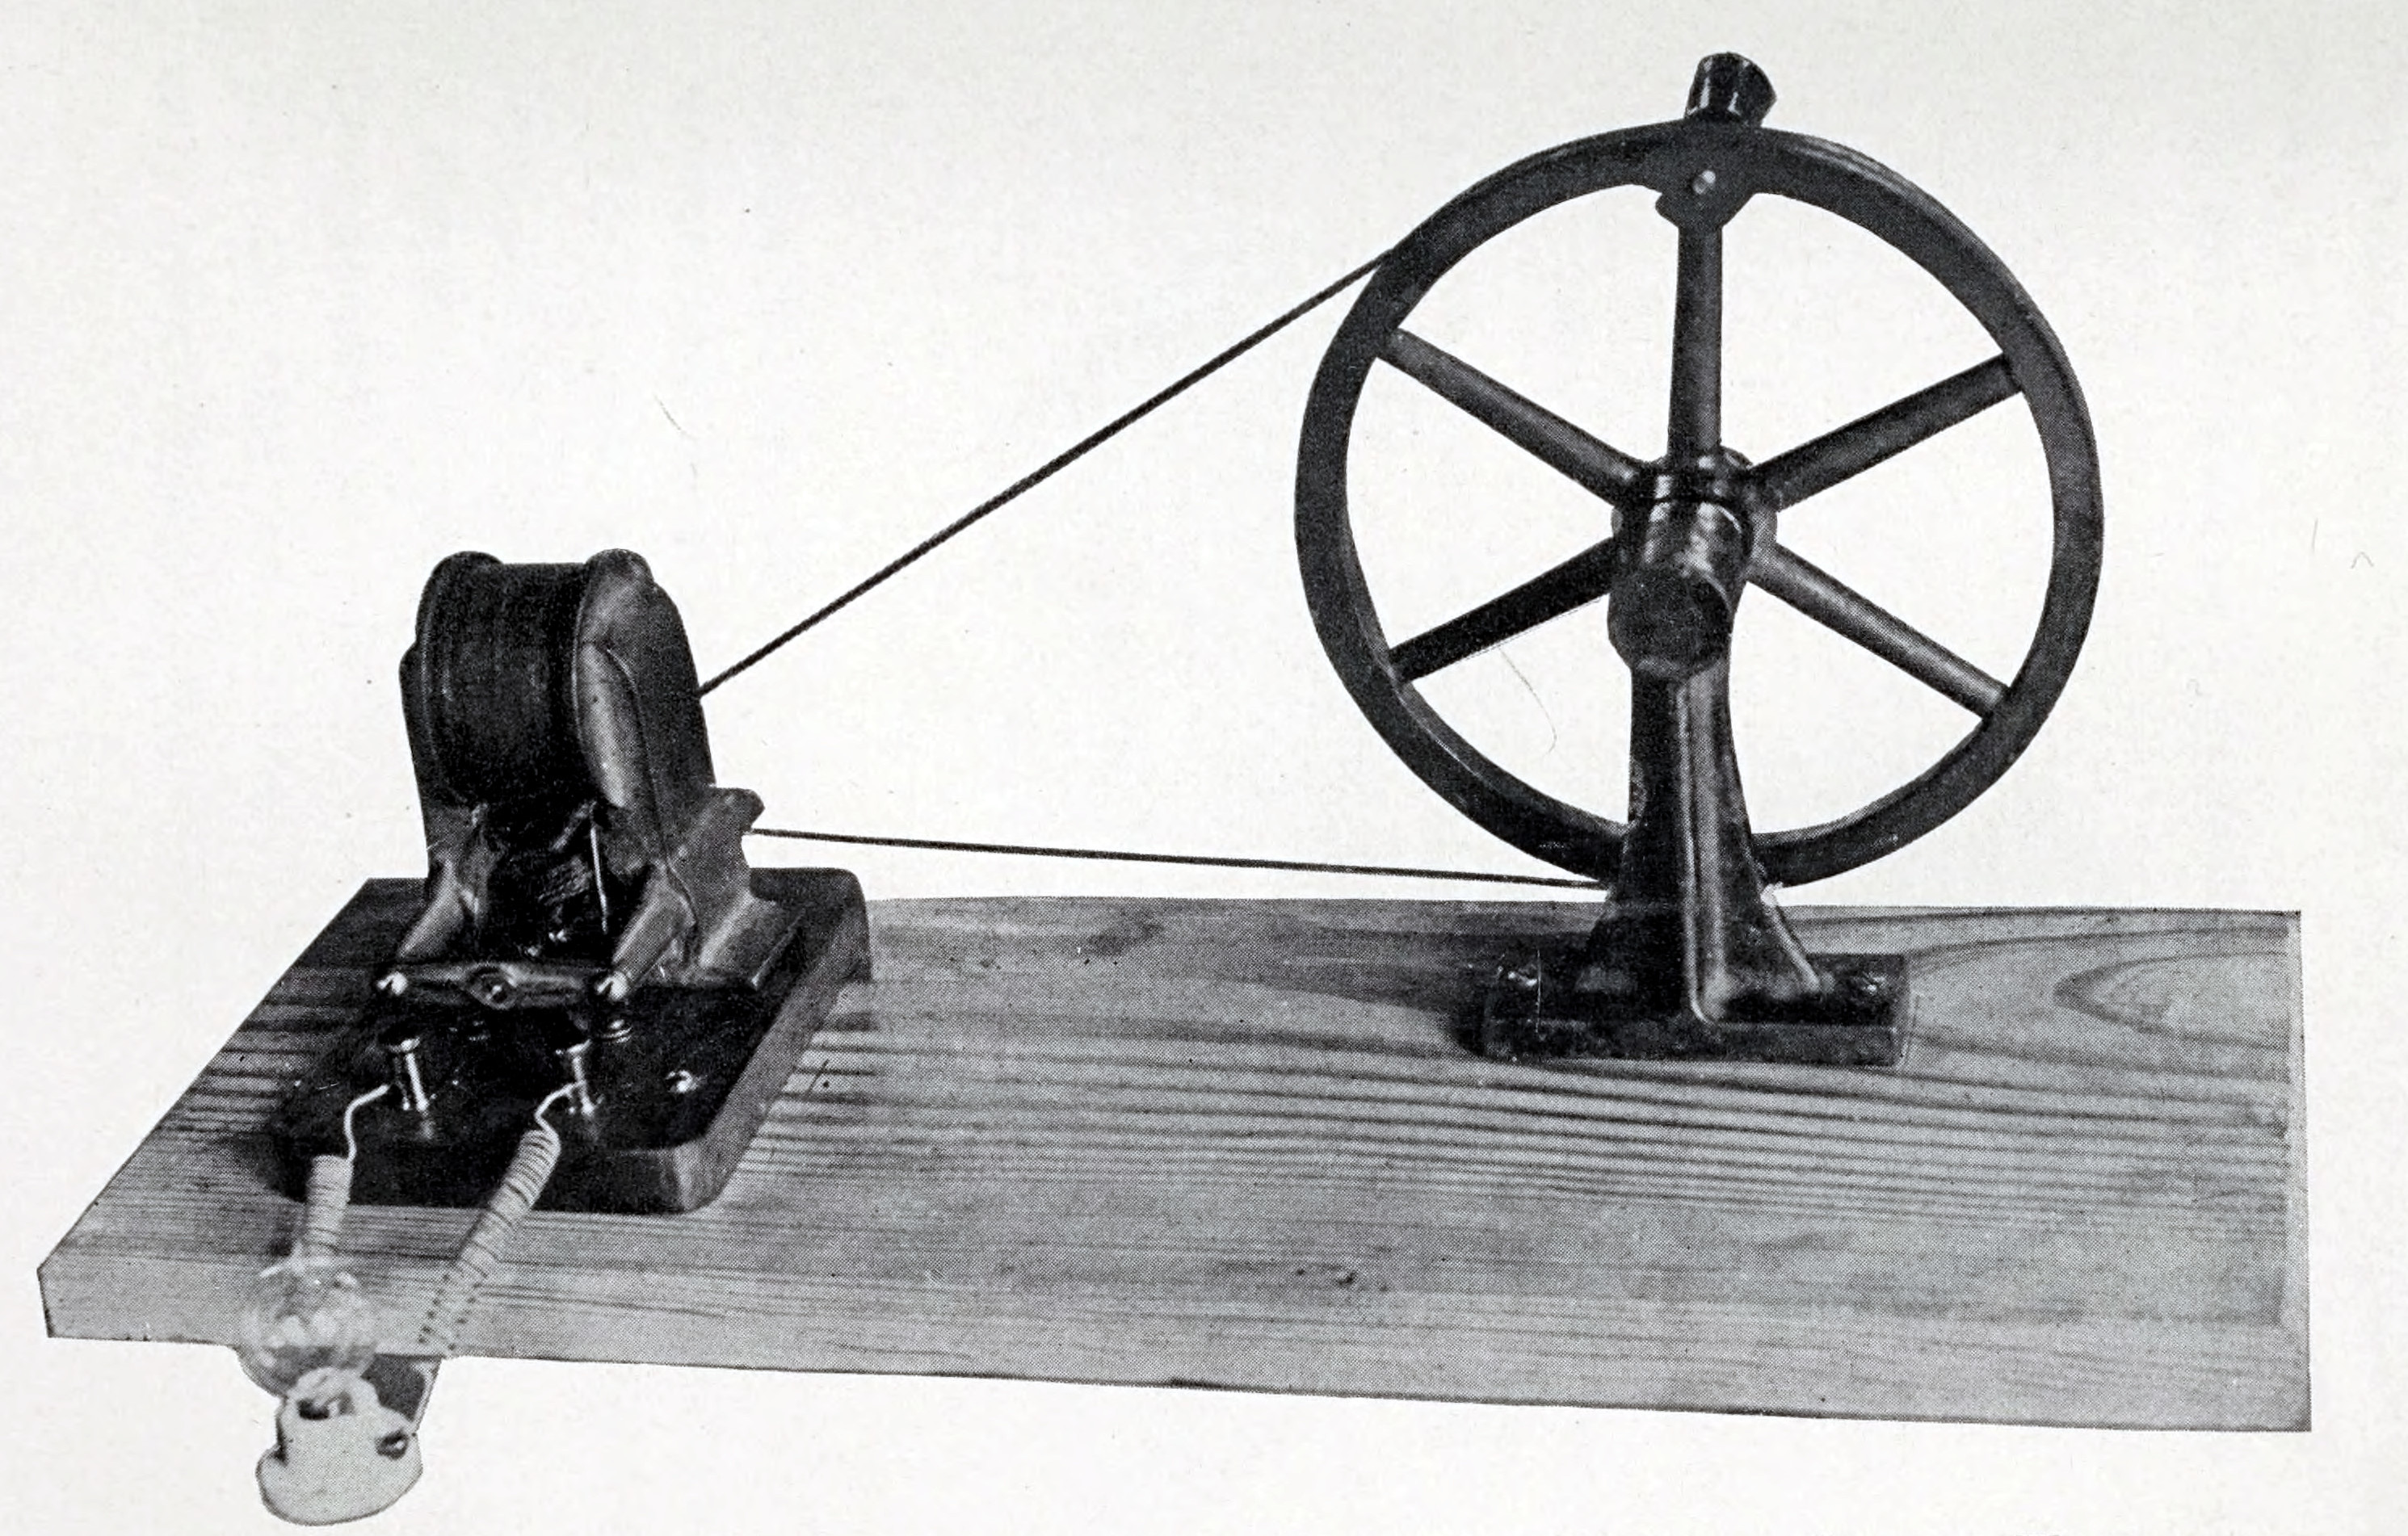 THE JUNIOR DYNAMO MOUNTED ON A LONG WOODEN BASE